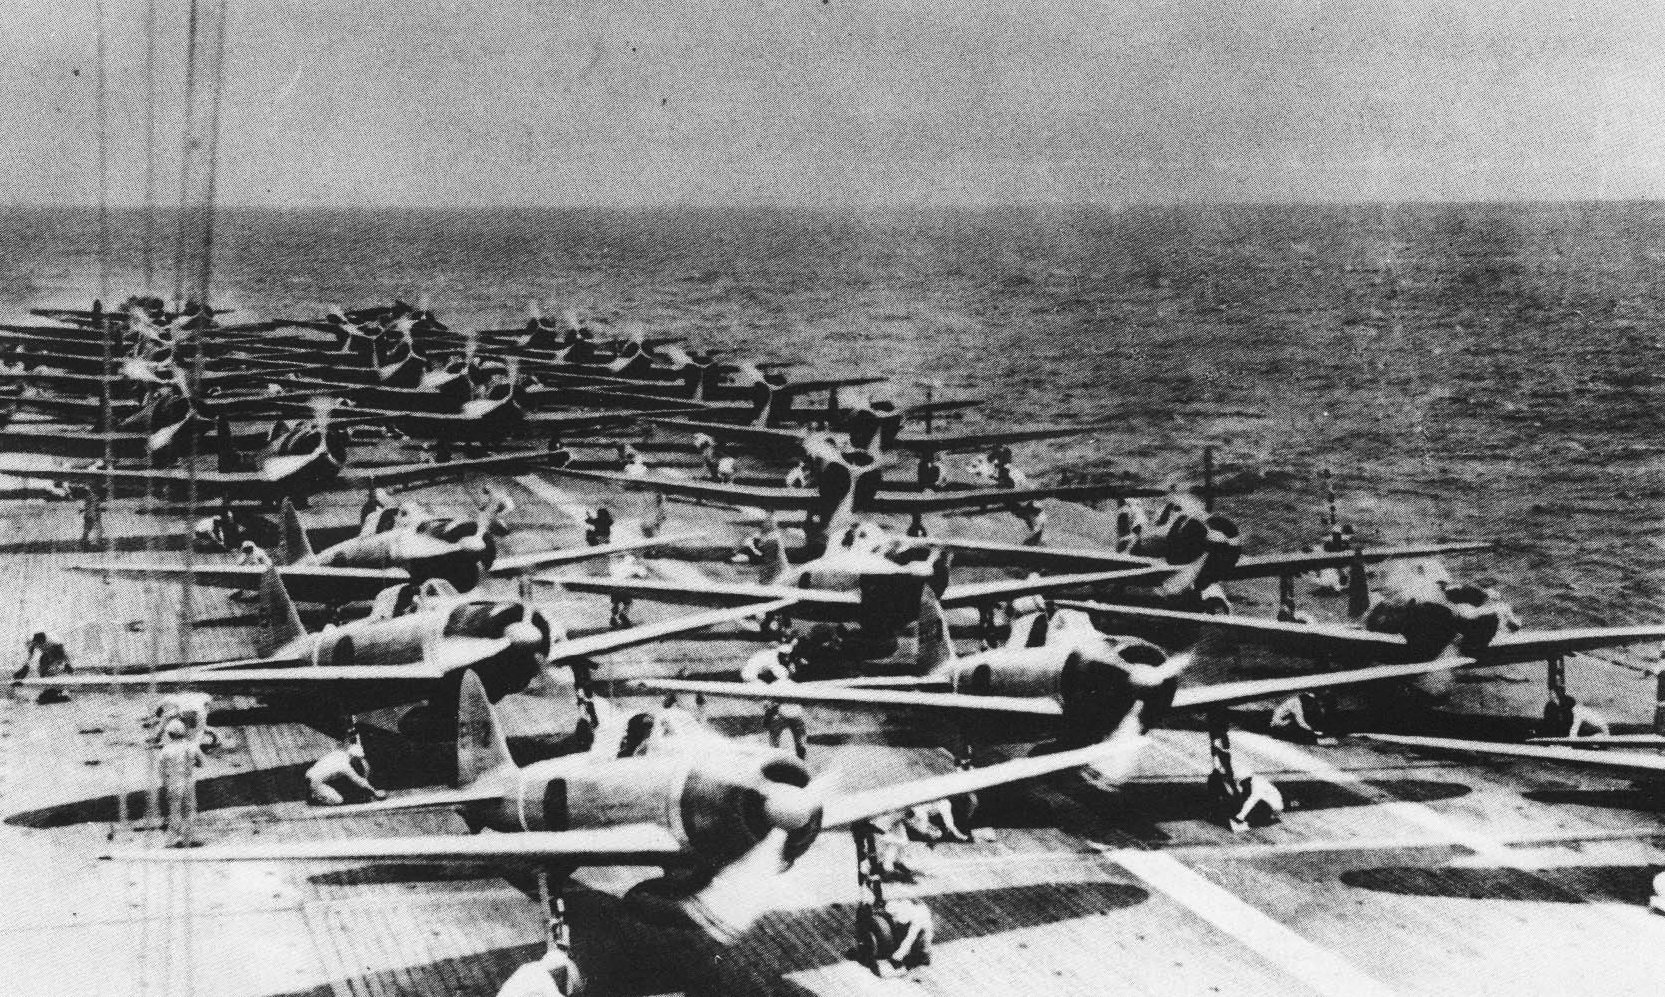 Historical black and white photo showing rows of Mitsubishi A6M2 Zero fighter aircraft lined up on the deck of the Imperial Japanese Navy aircraft carrier Shokaku, ready for the first strike wave against Pearl Harbor on December 7, 1941. The sea is visible in the background, indicating the carrier is at sea and poised for the imminent attack.